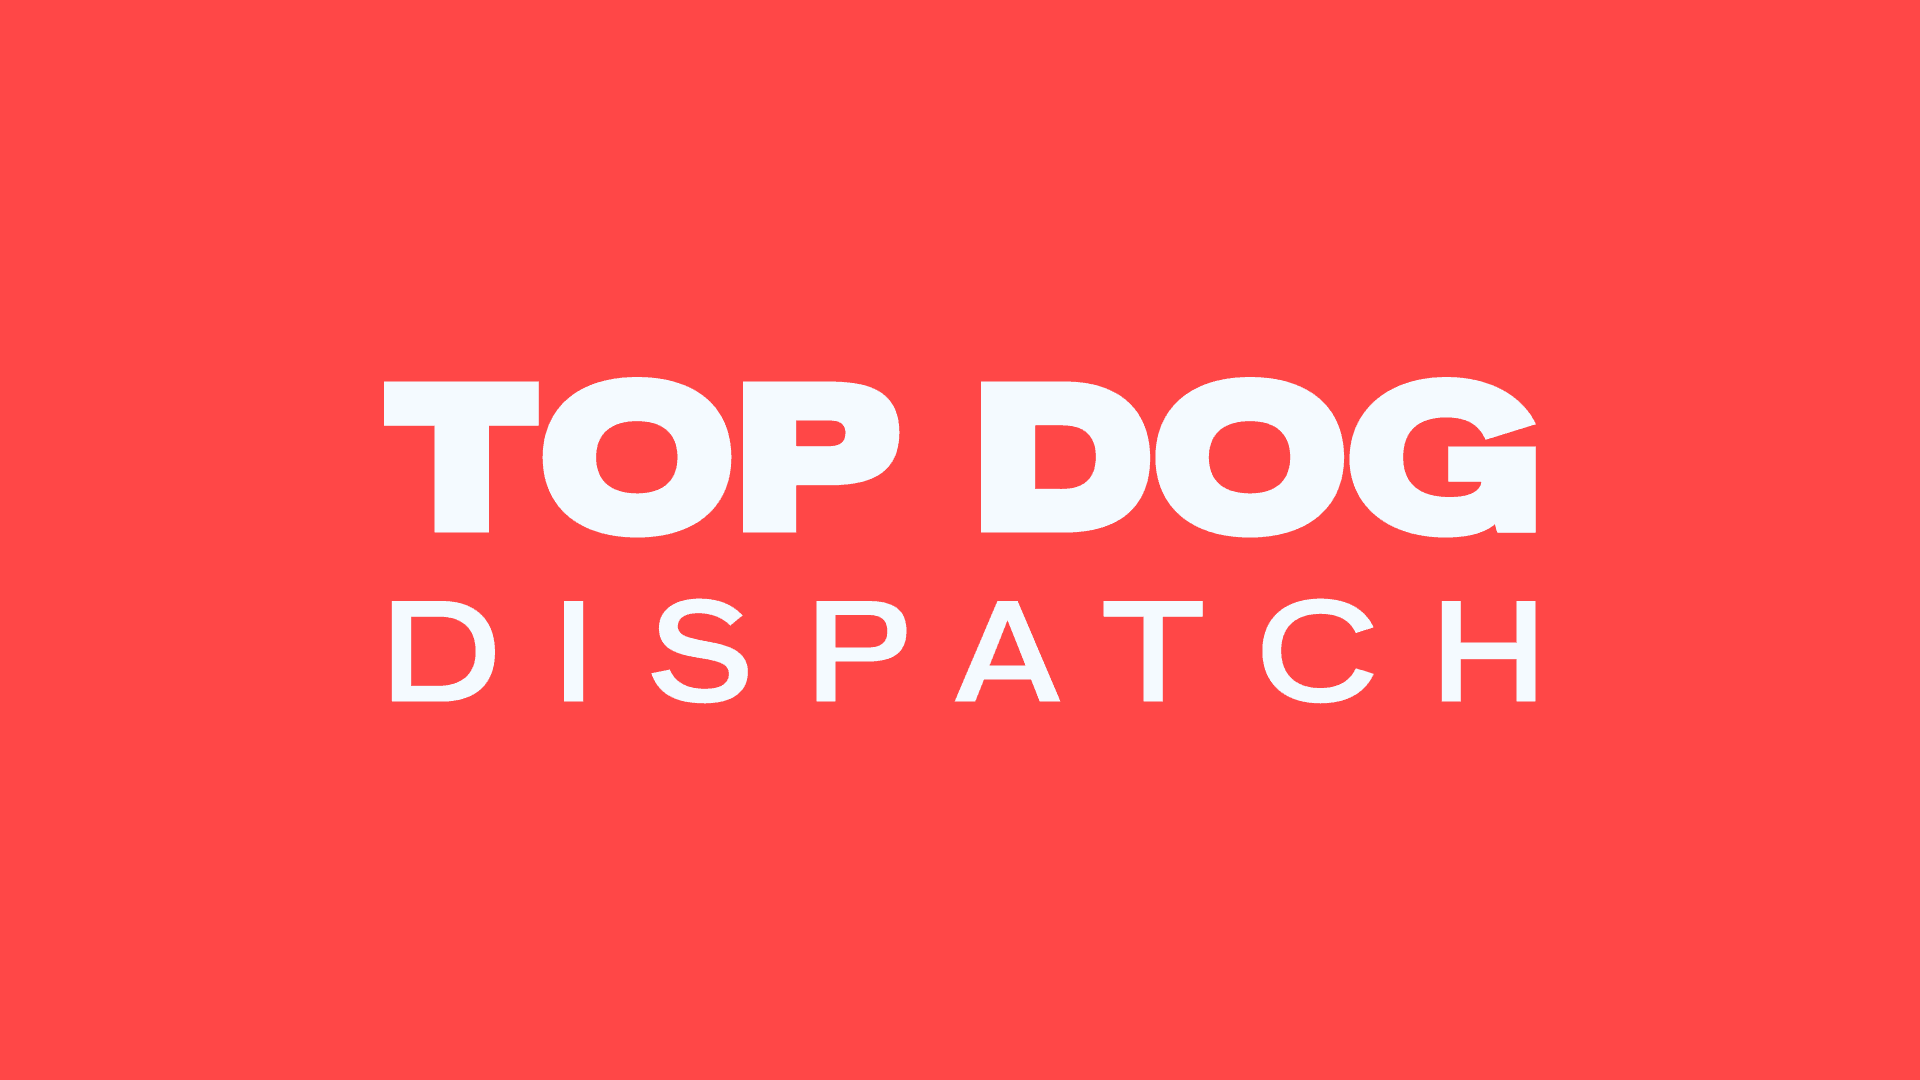 Dispatch Service for Owner Operators & Small Fleets | Top Dog Dispatch